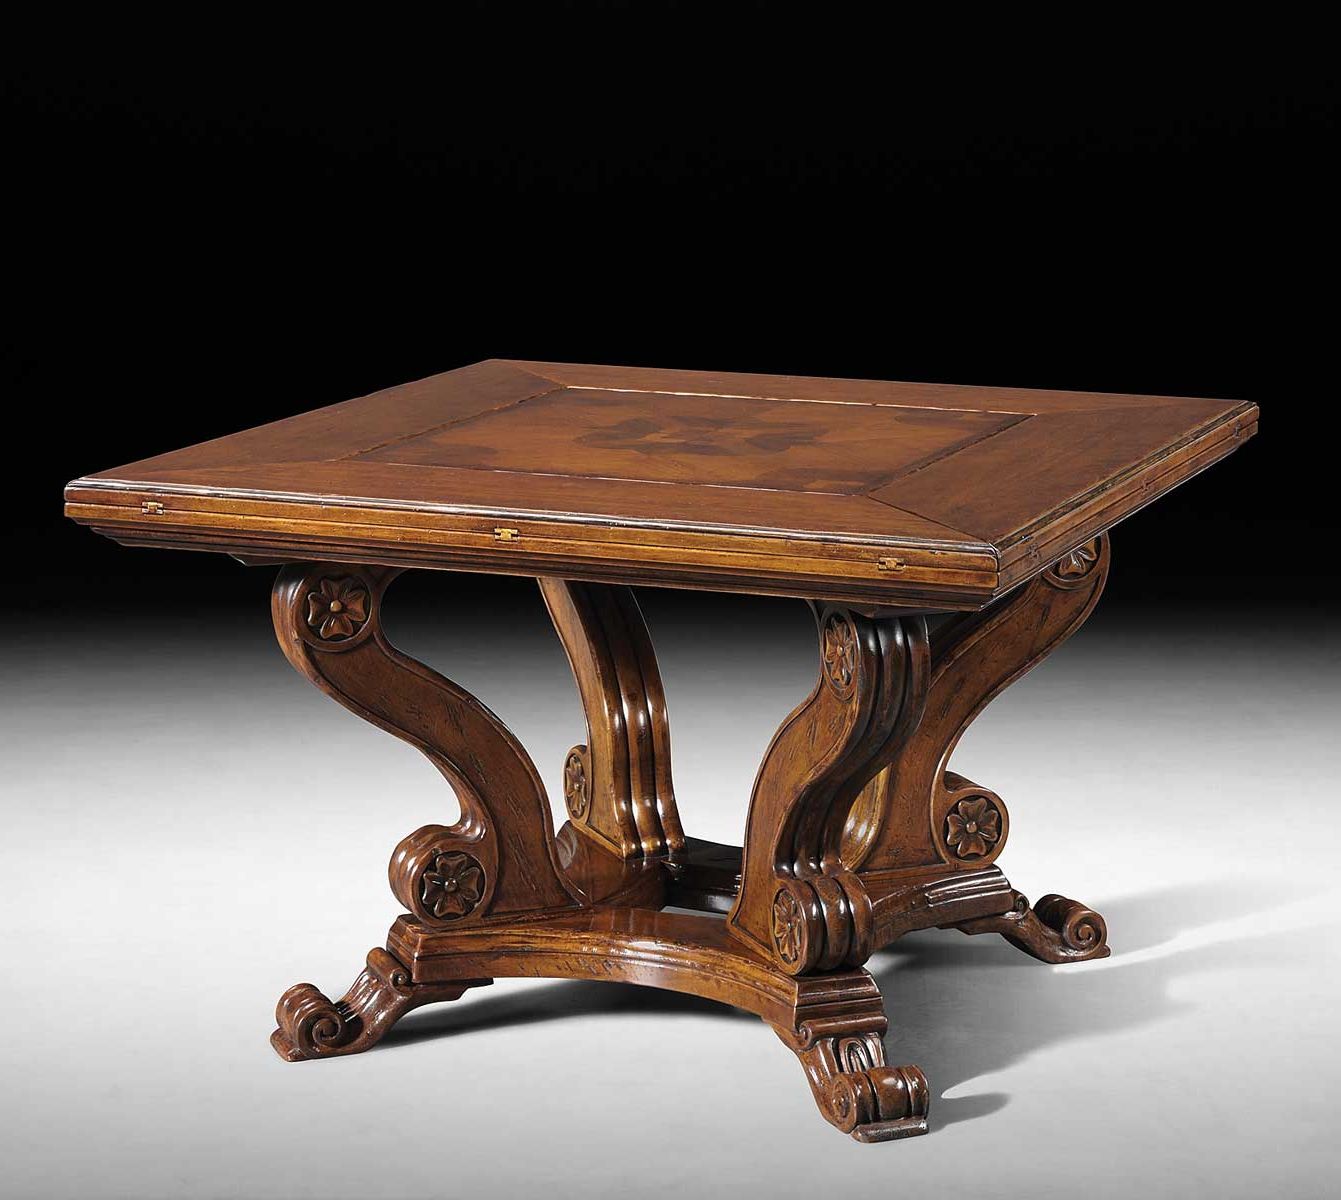 Gv 833 Folding Square To Octagonal Table – David Michael Intended For Trendy Octagon Console Tables (View 6 of 10)